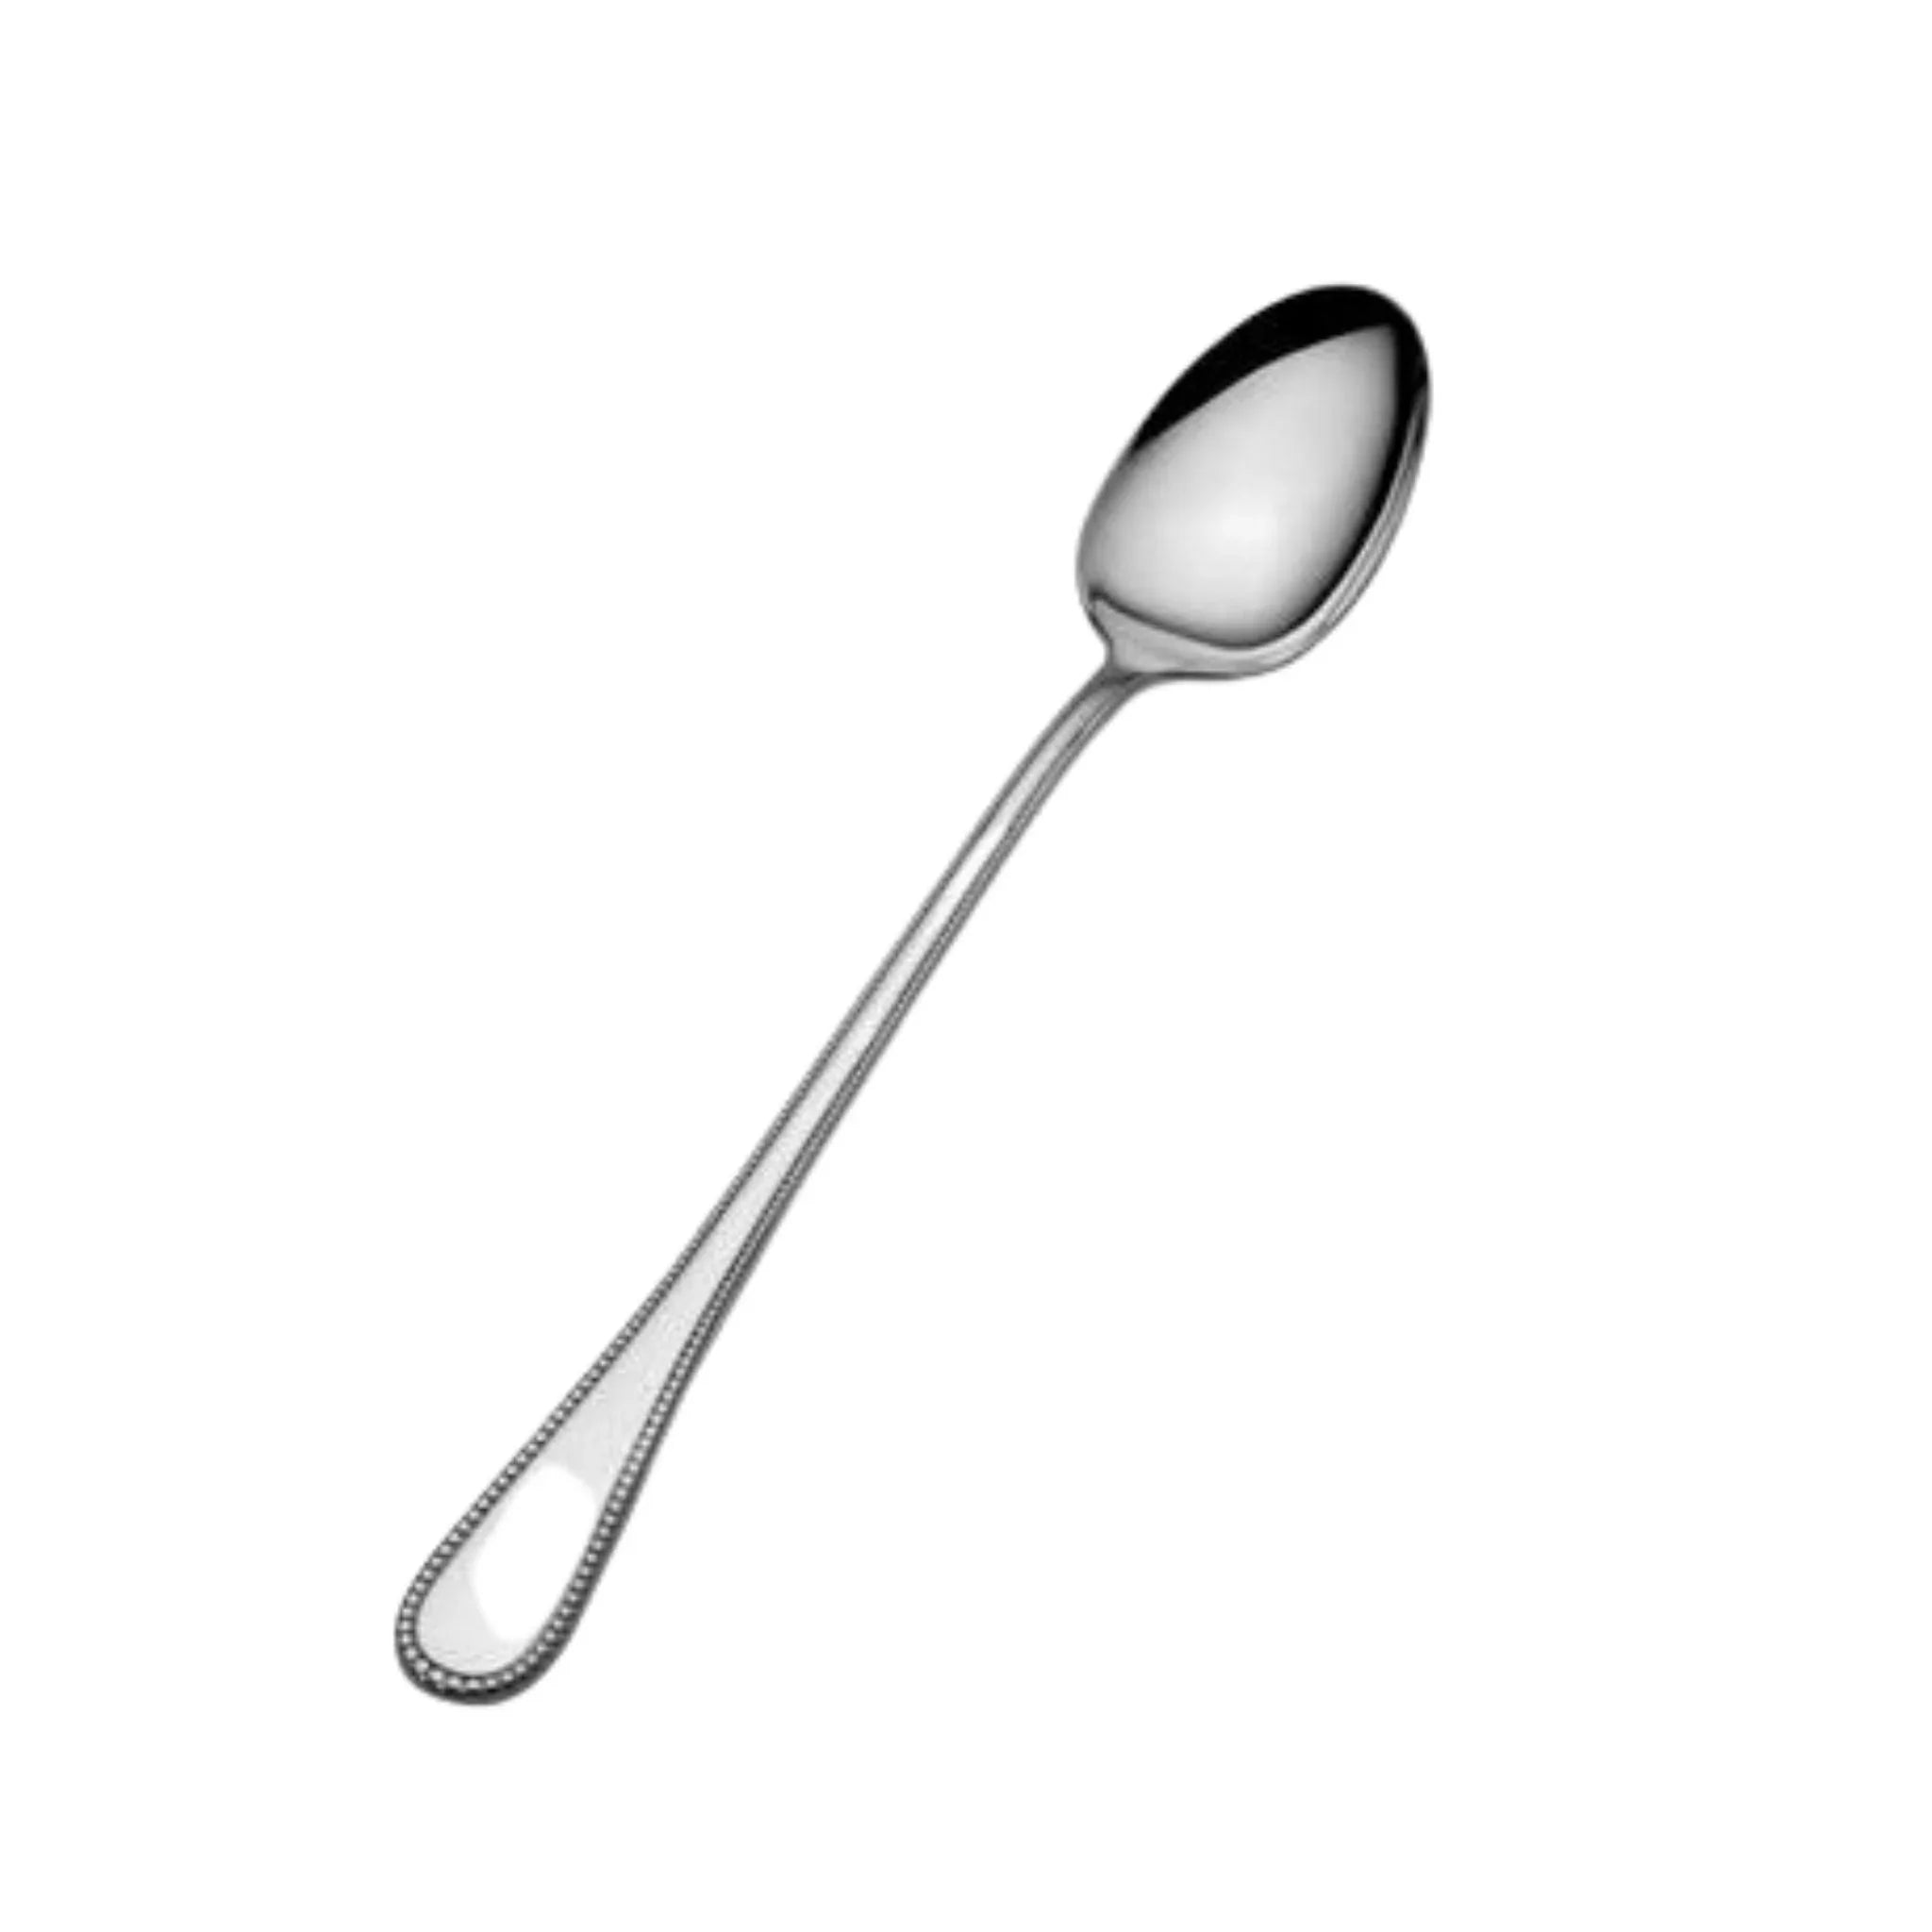 https://www.wellappointedhouse.com/cdn/shop/files/sterling-silver-beaded-infant-feeding-spoon-baby-gifts-the-well-appointed-house_d75acb8e-a758-4816-93be-3515351e6db7.webp?v=1691689266